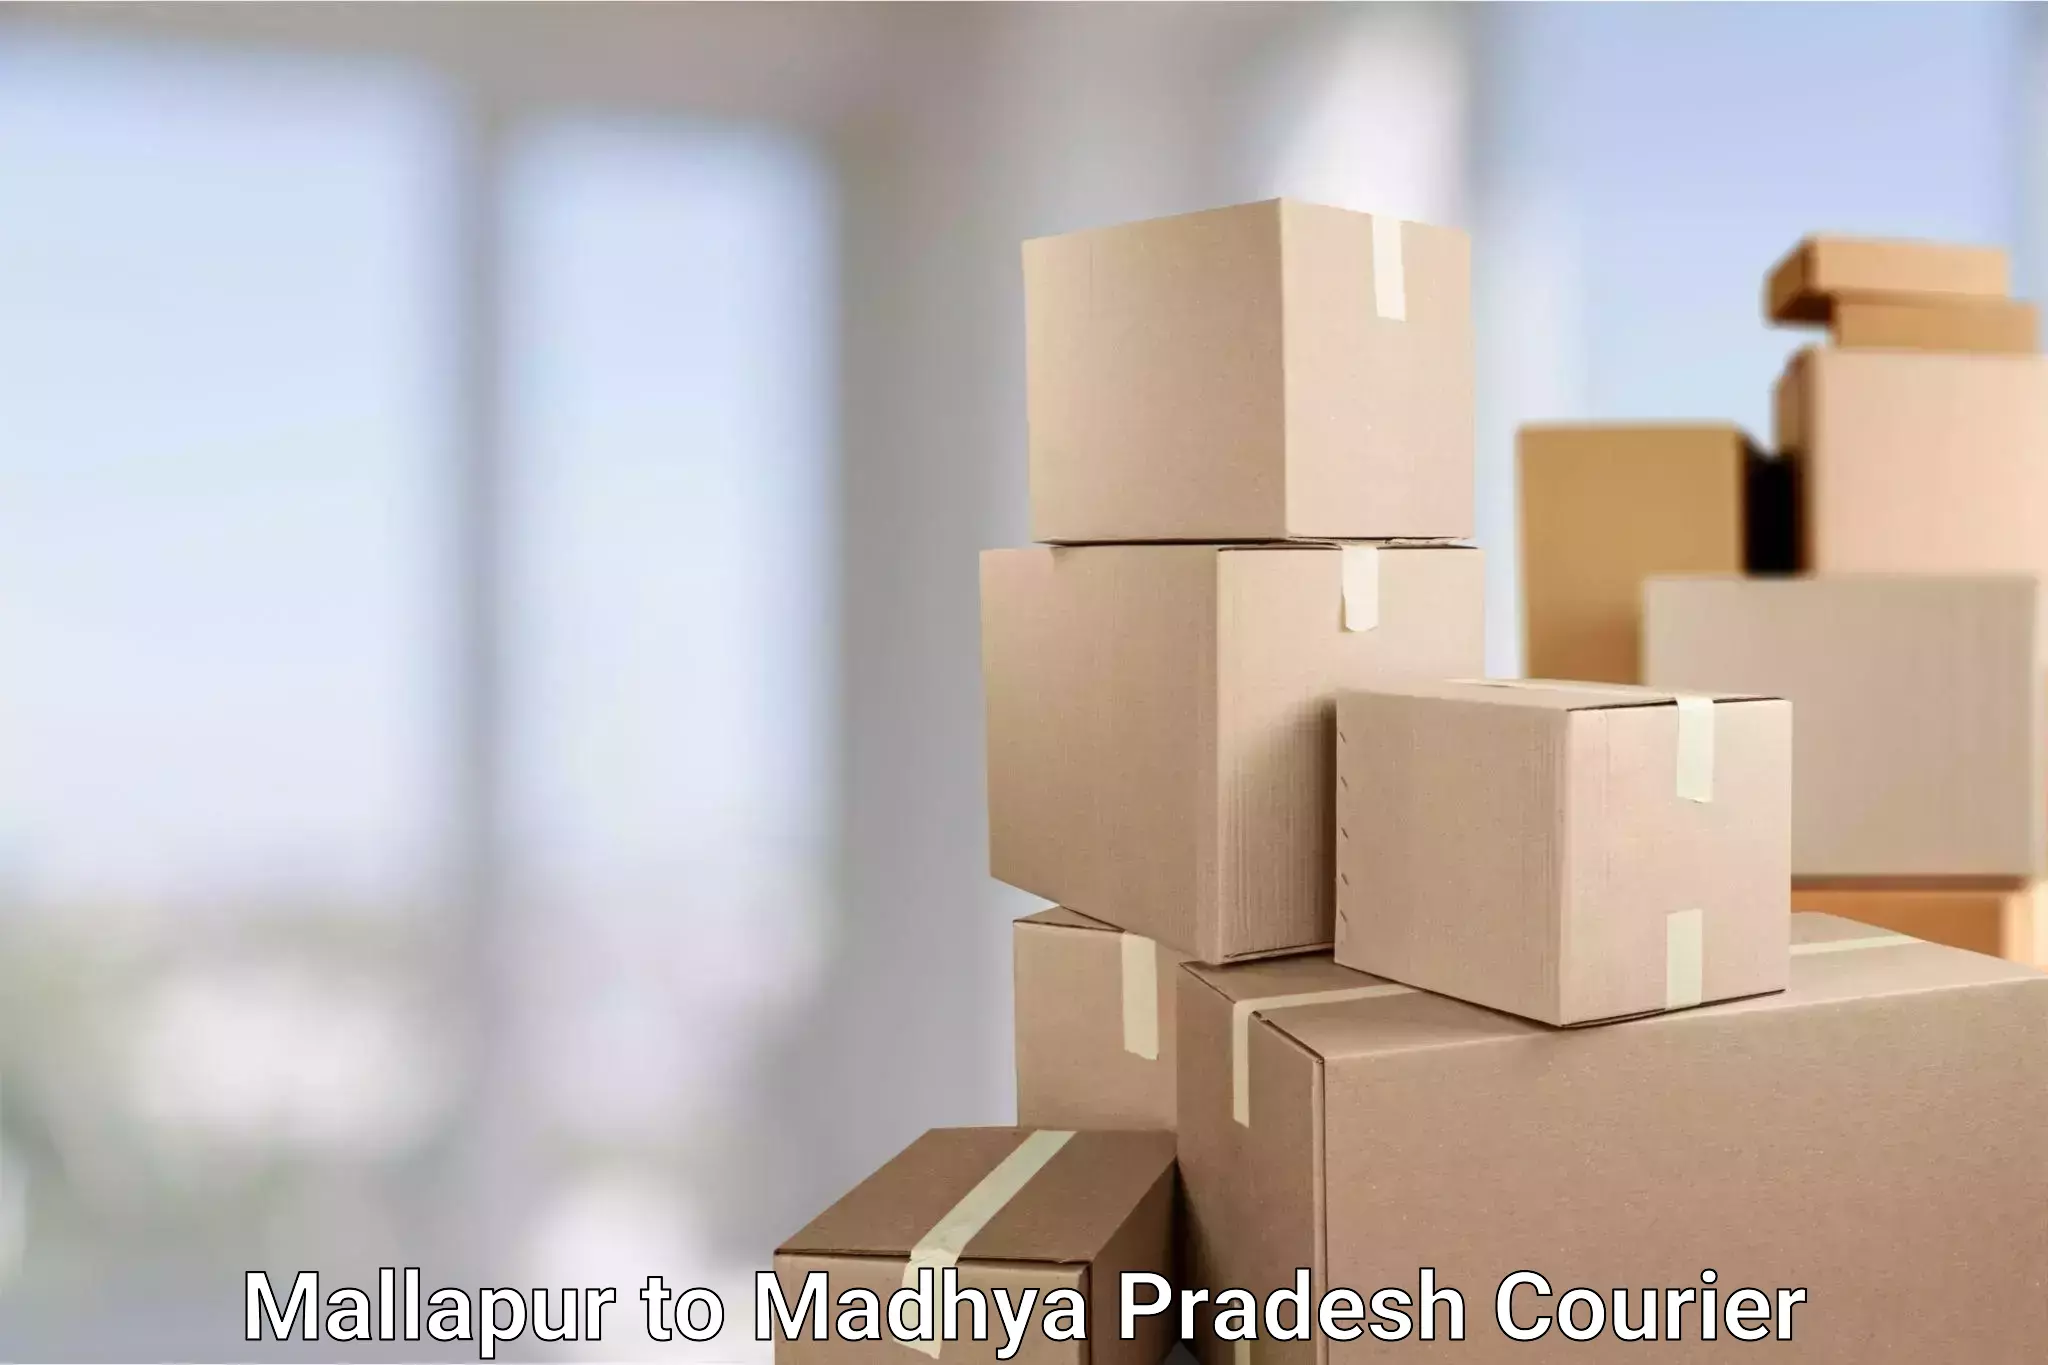 Personal parcel delivery in Mallapur to Madhya Pradesh